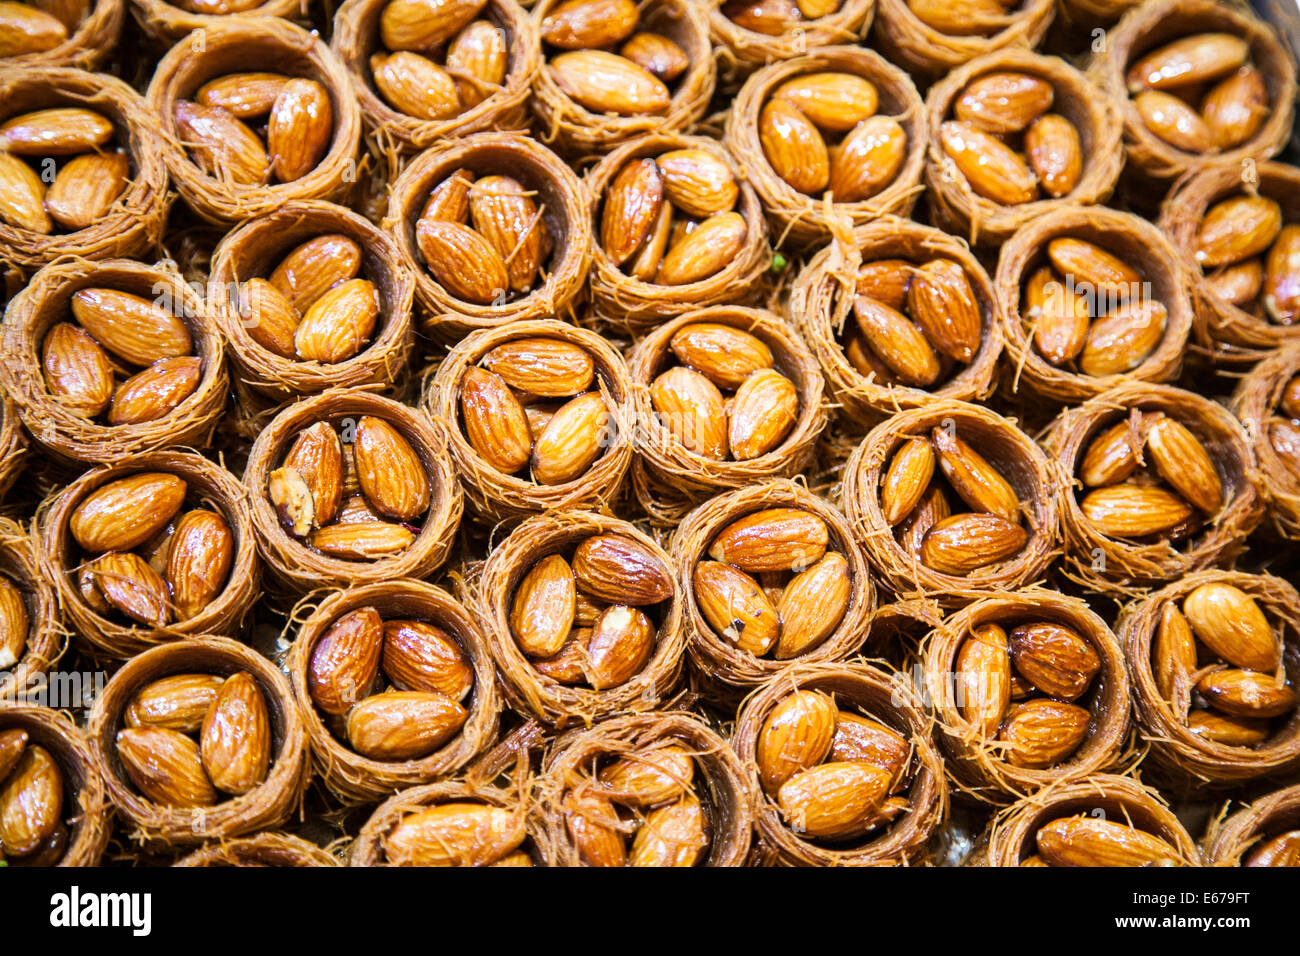 Almond sweets at the spice market in Istanbul Stock Photo